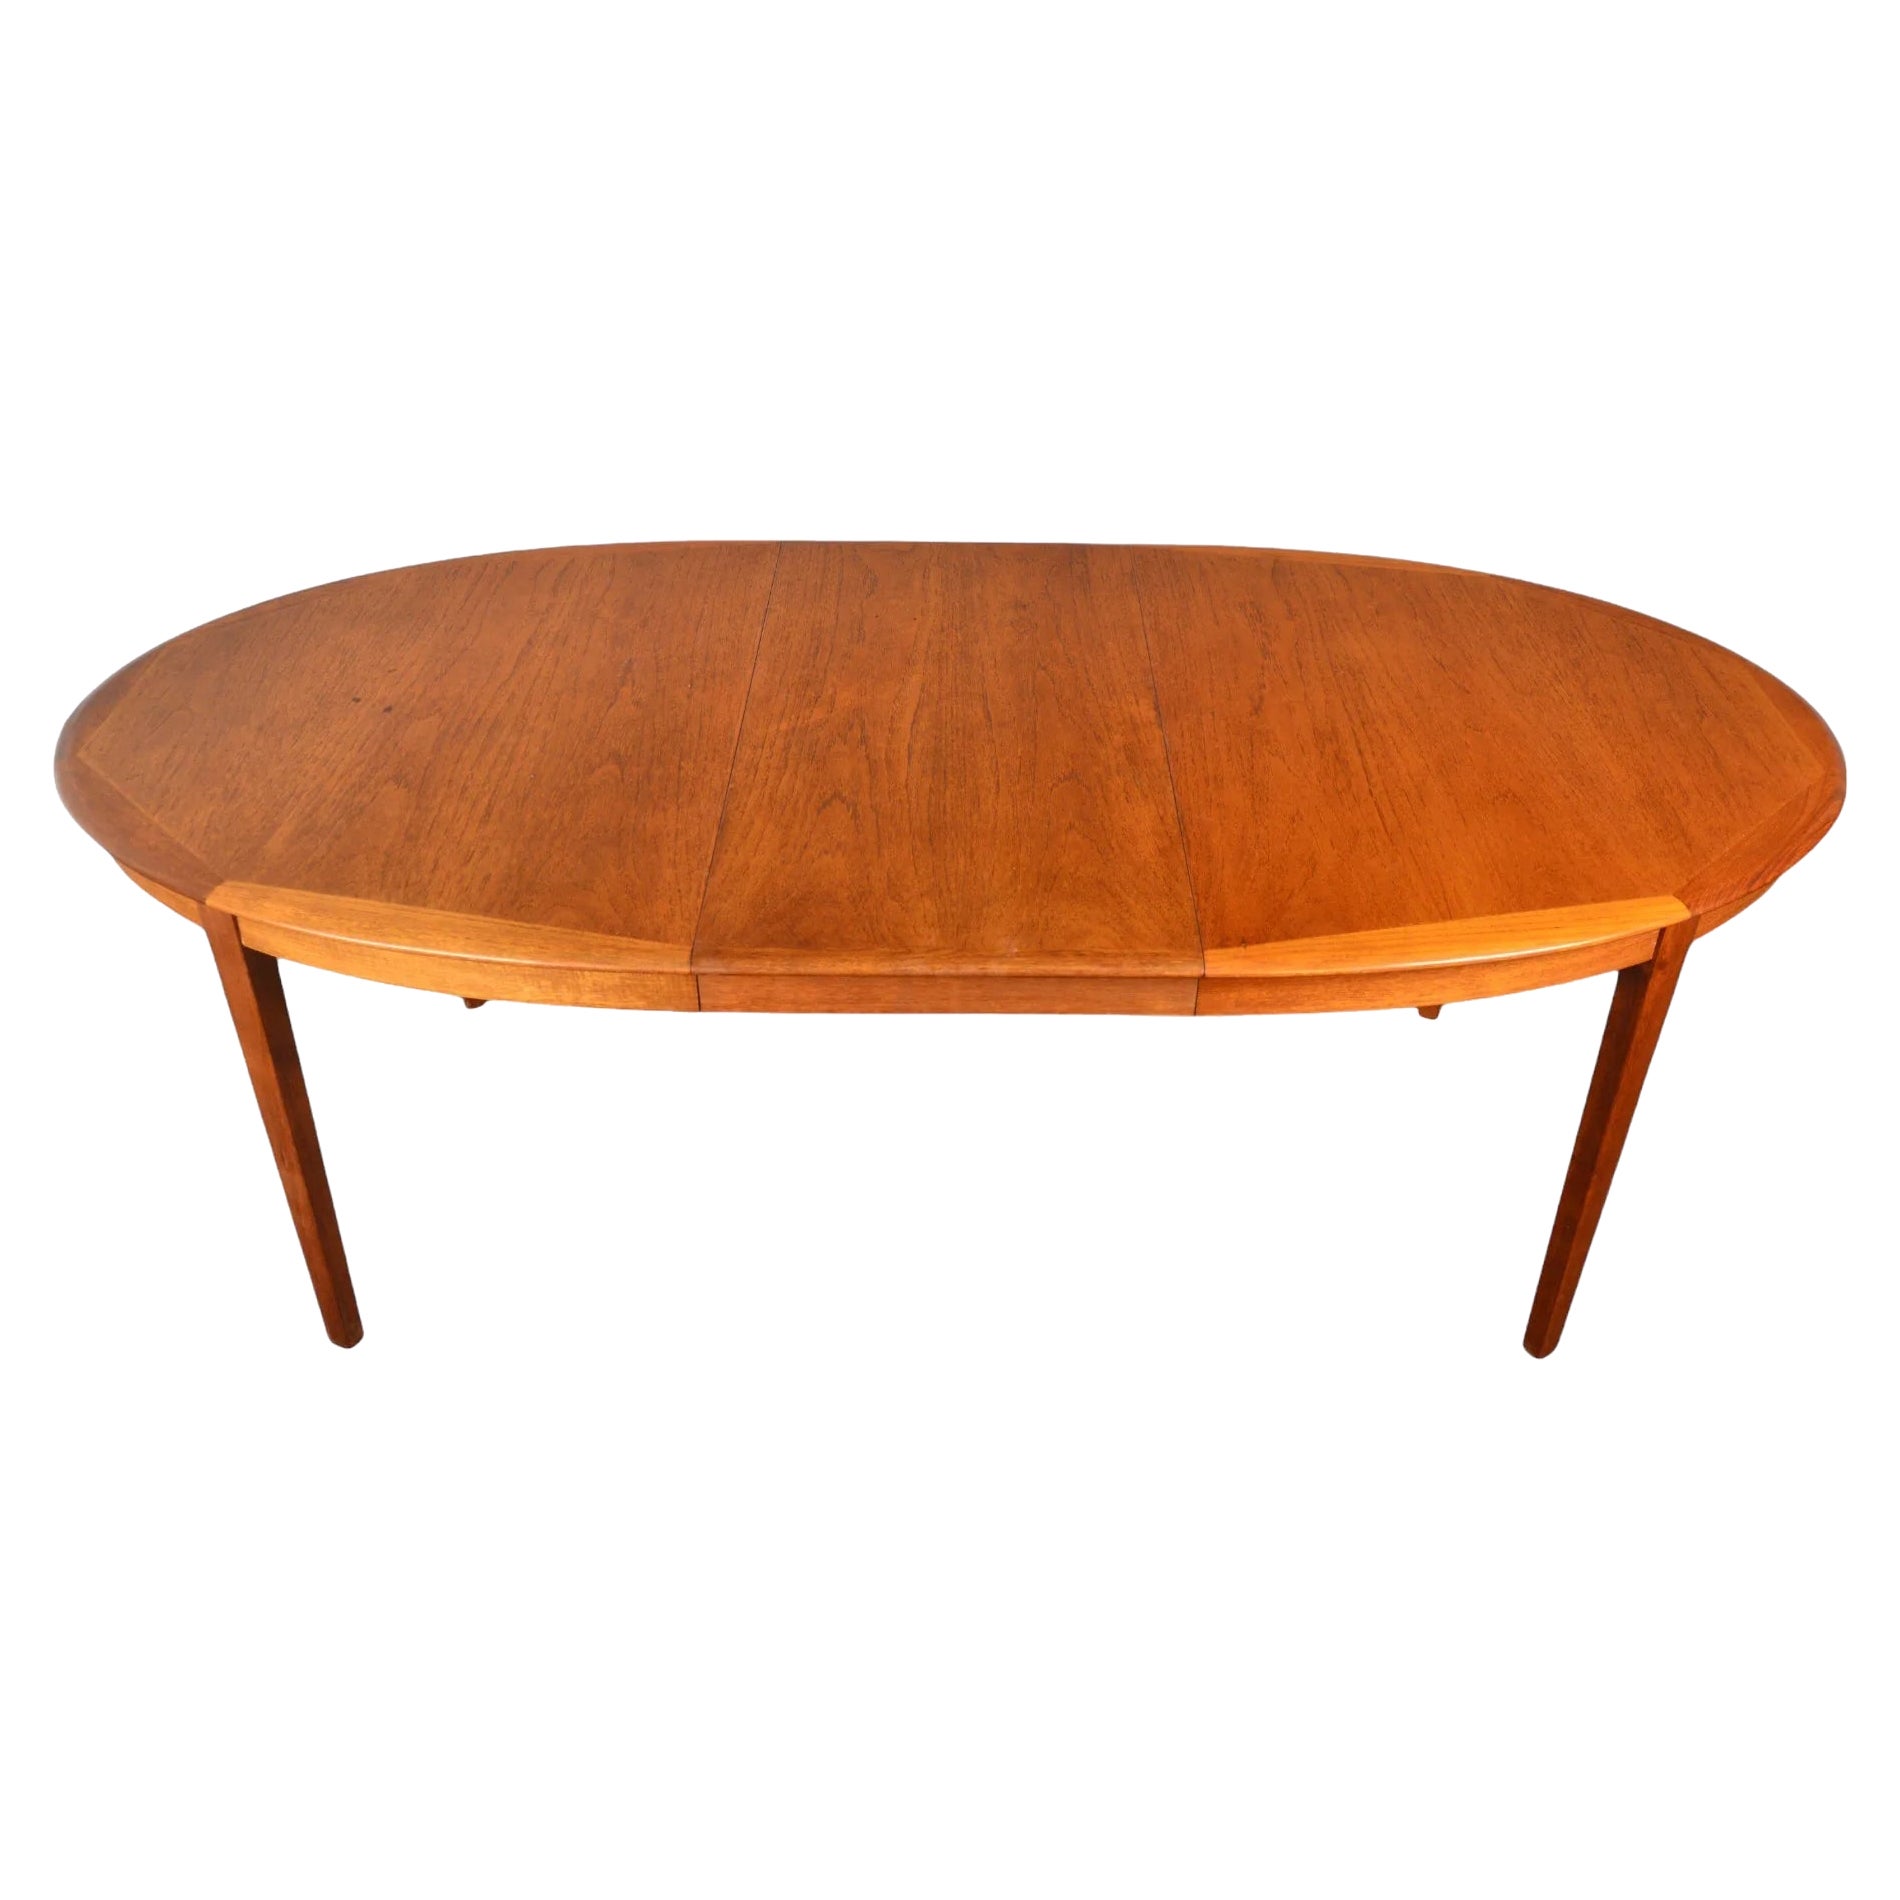 Danish Modern Oval Teak Dining Table + Two Leaves By Byrlund For Sale